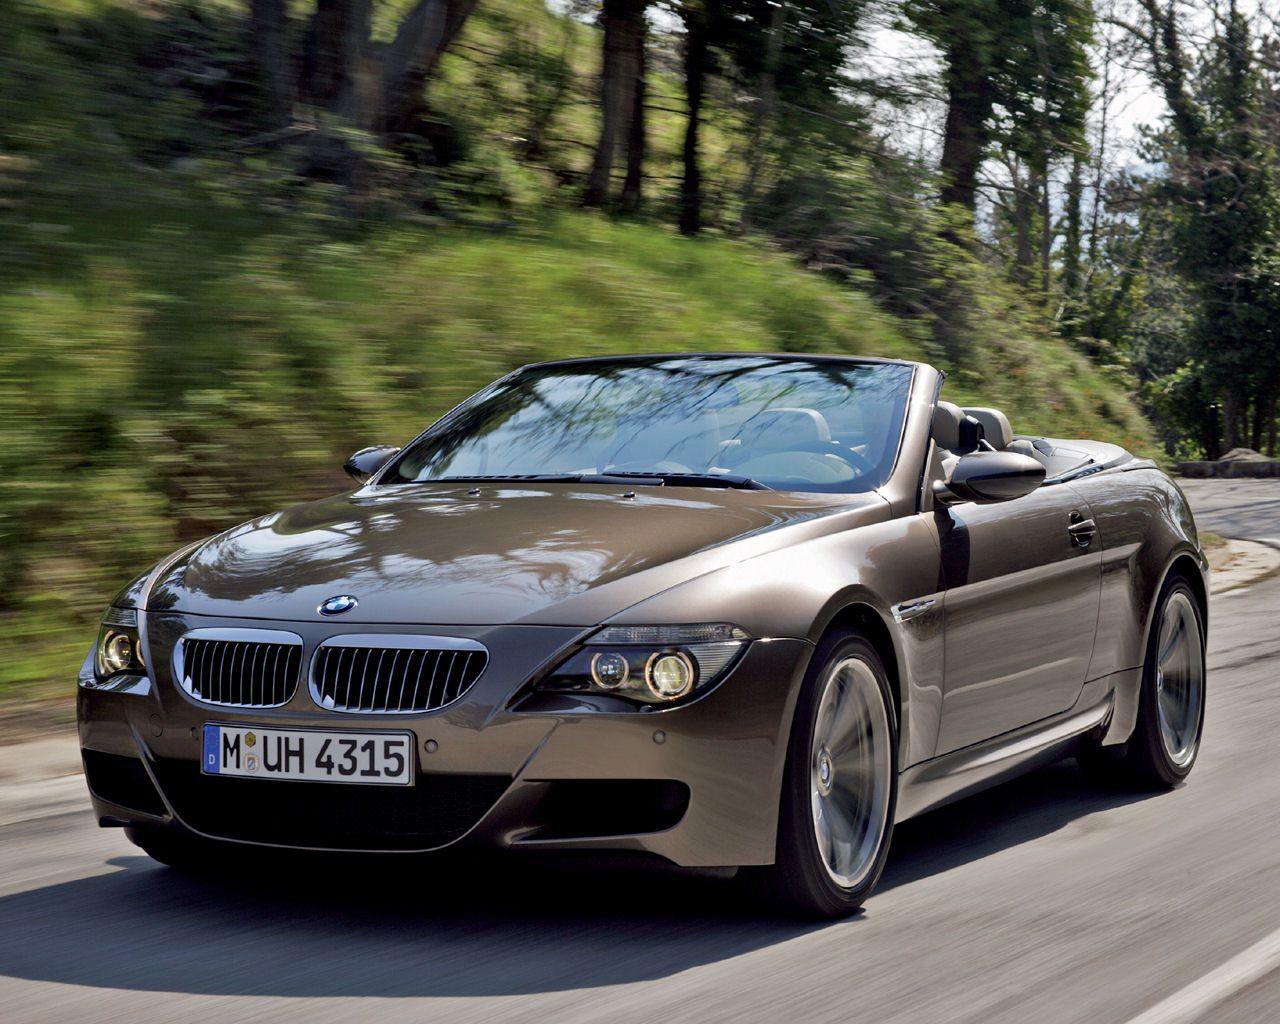 BMW 6 Series, 650i, M6 V Coupe, Convertible 1280x1024